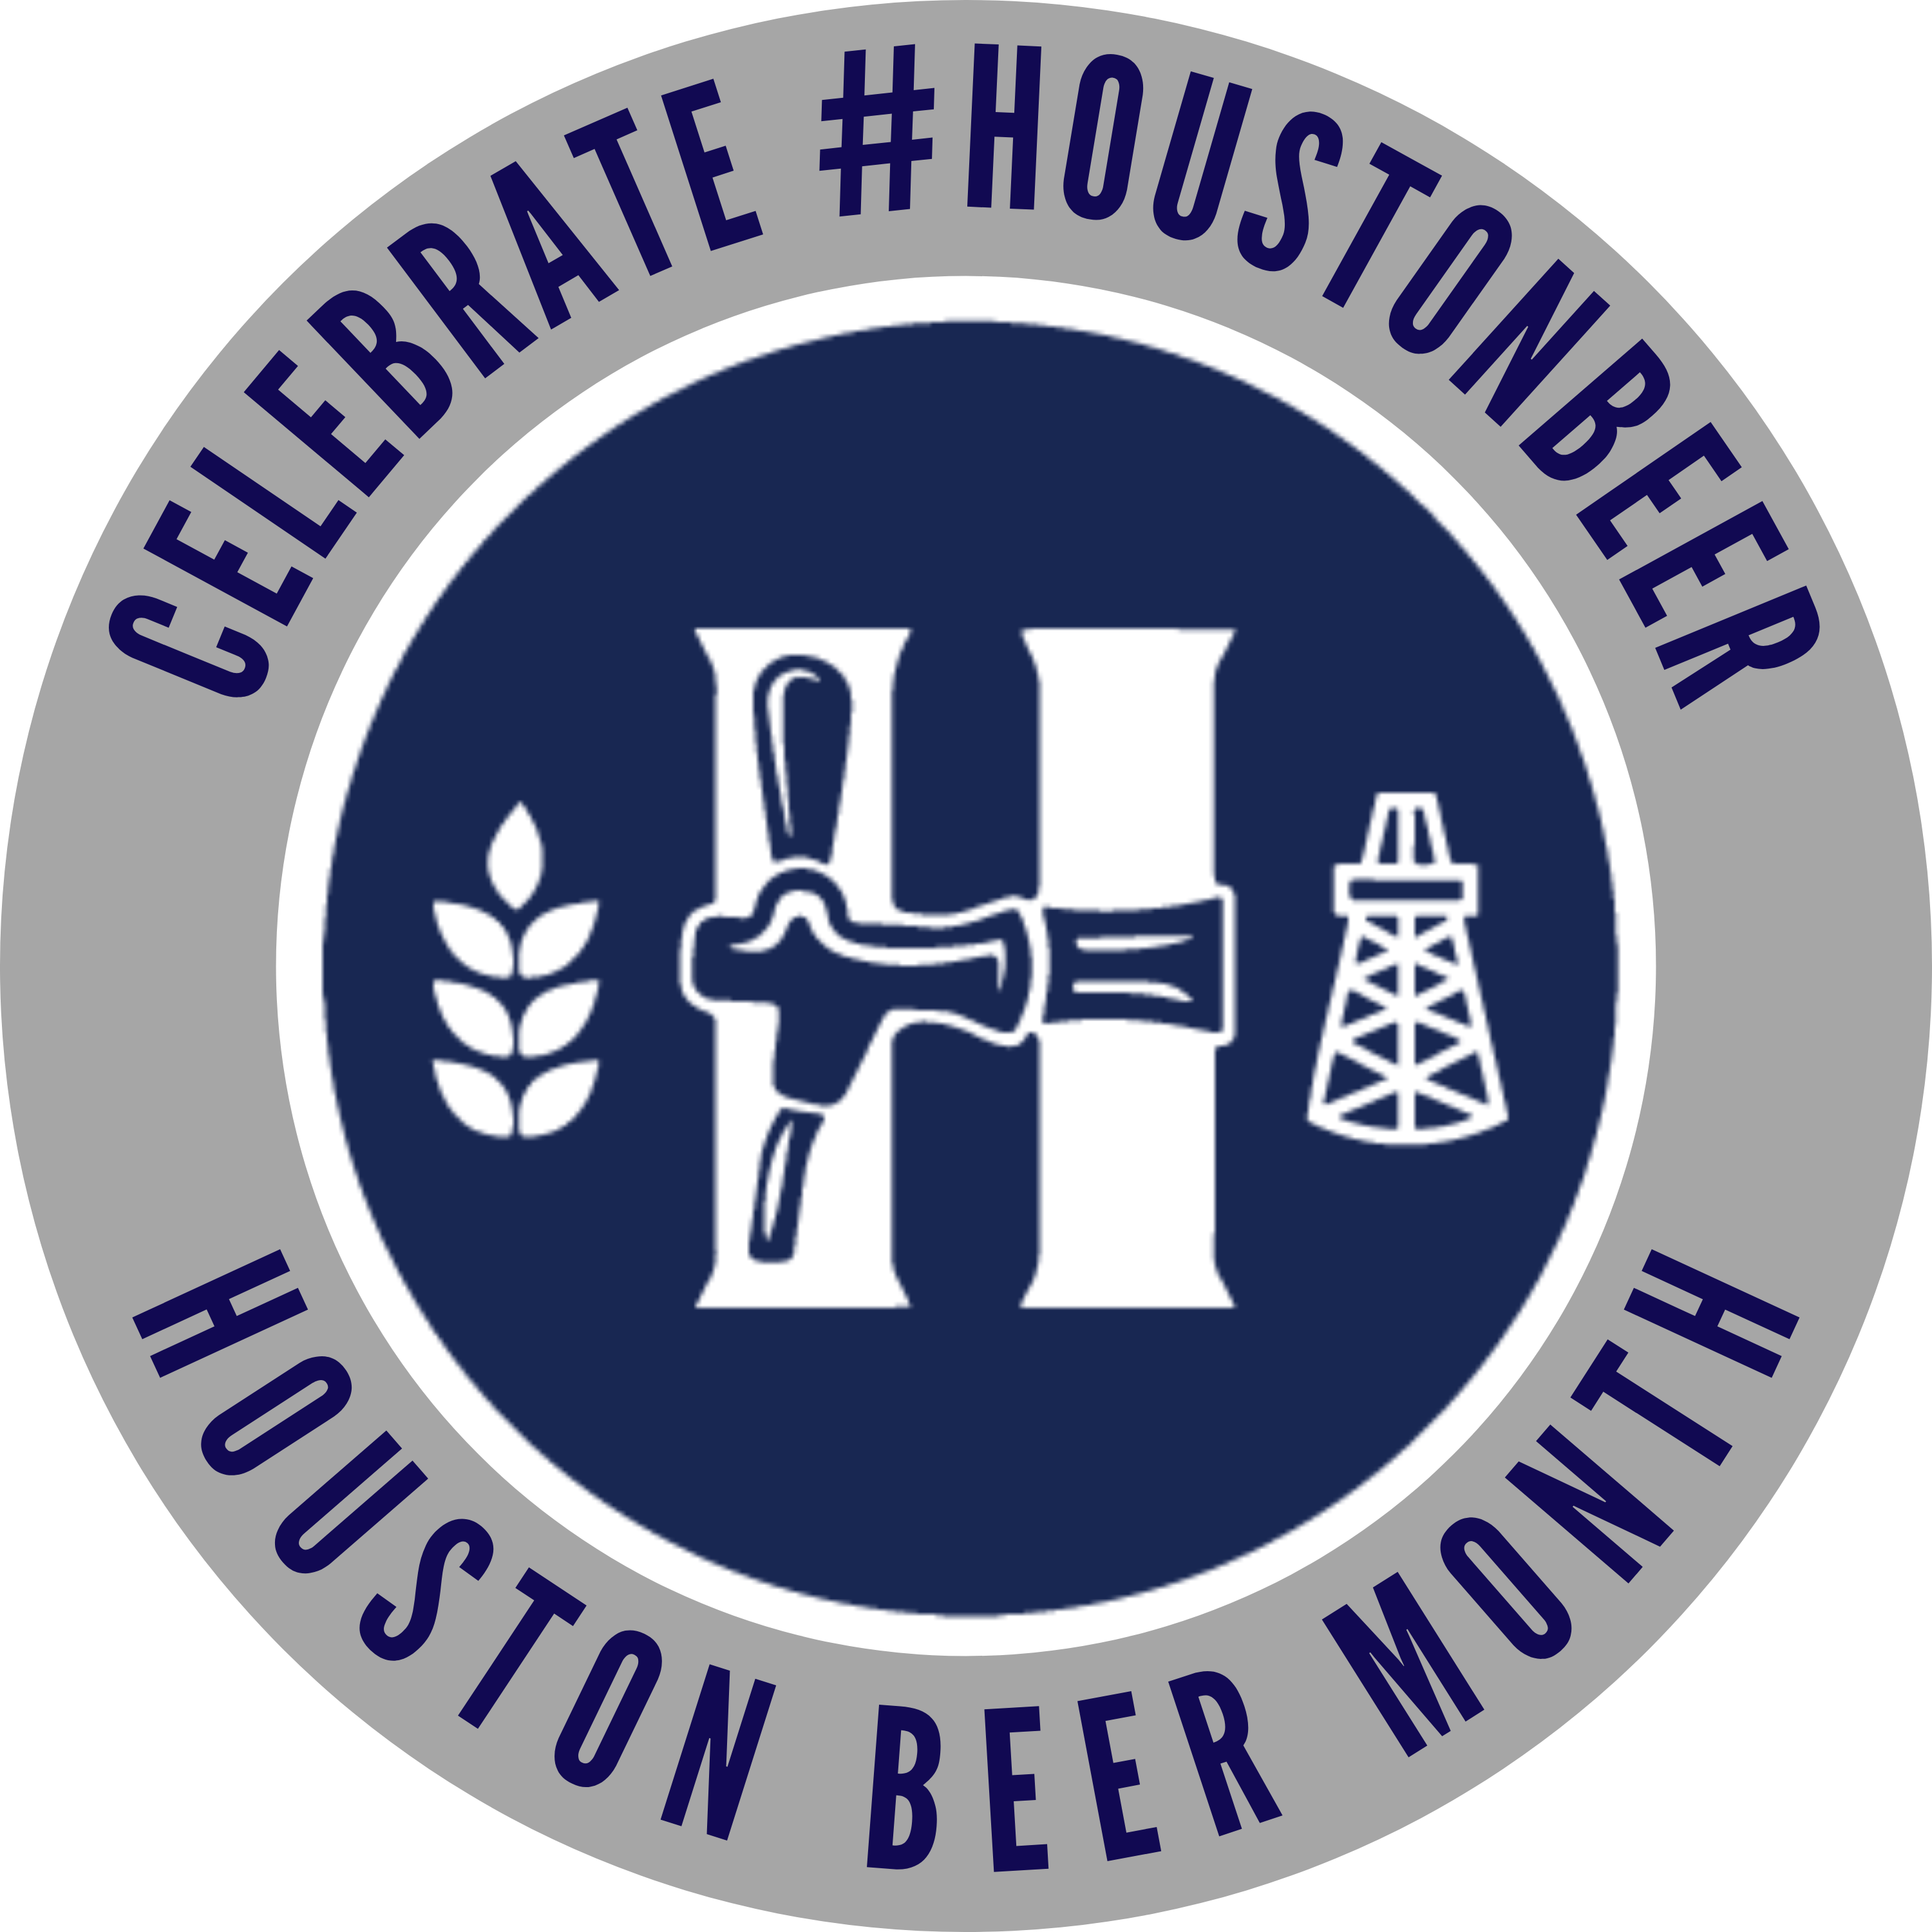 Houston Beer Month is here! Wait, is this still a thing? Houston Beer